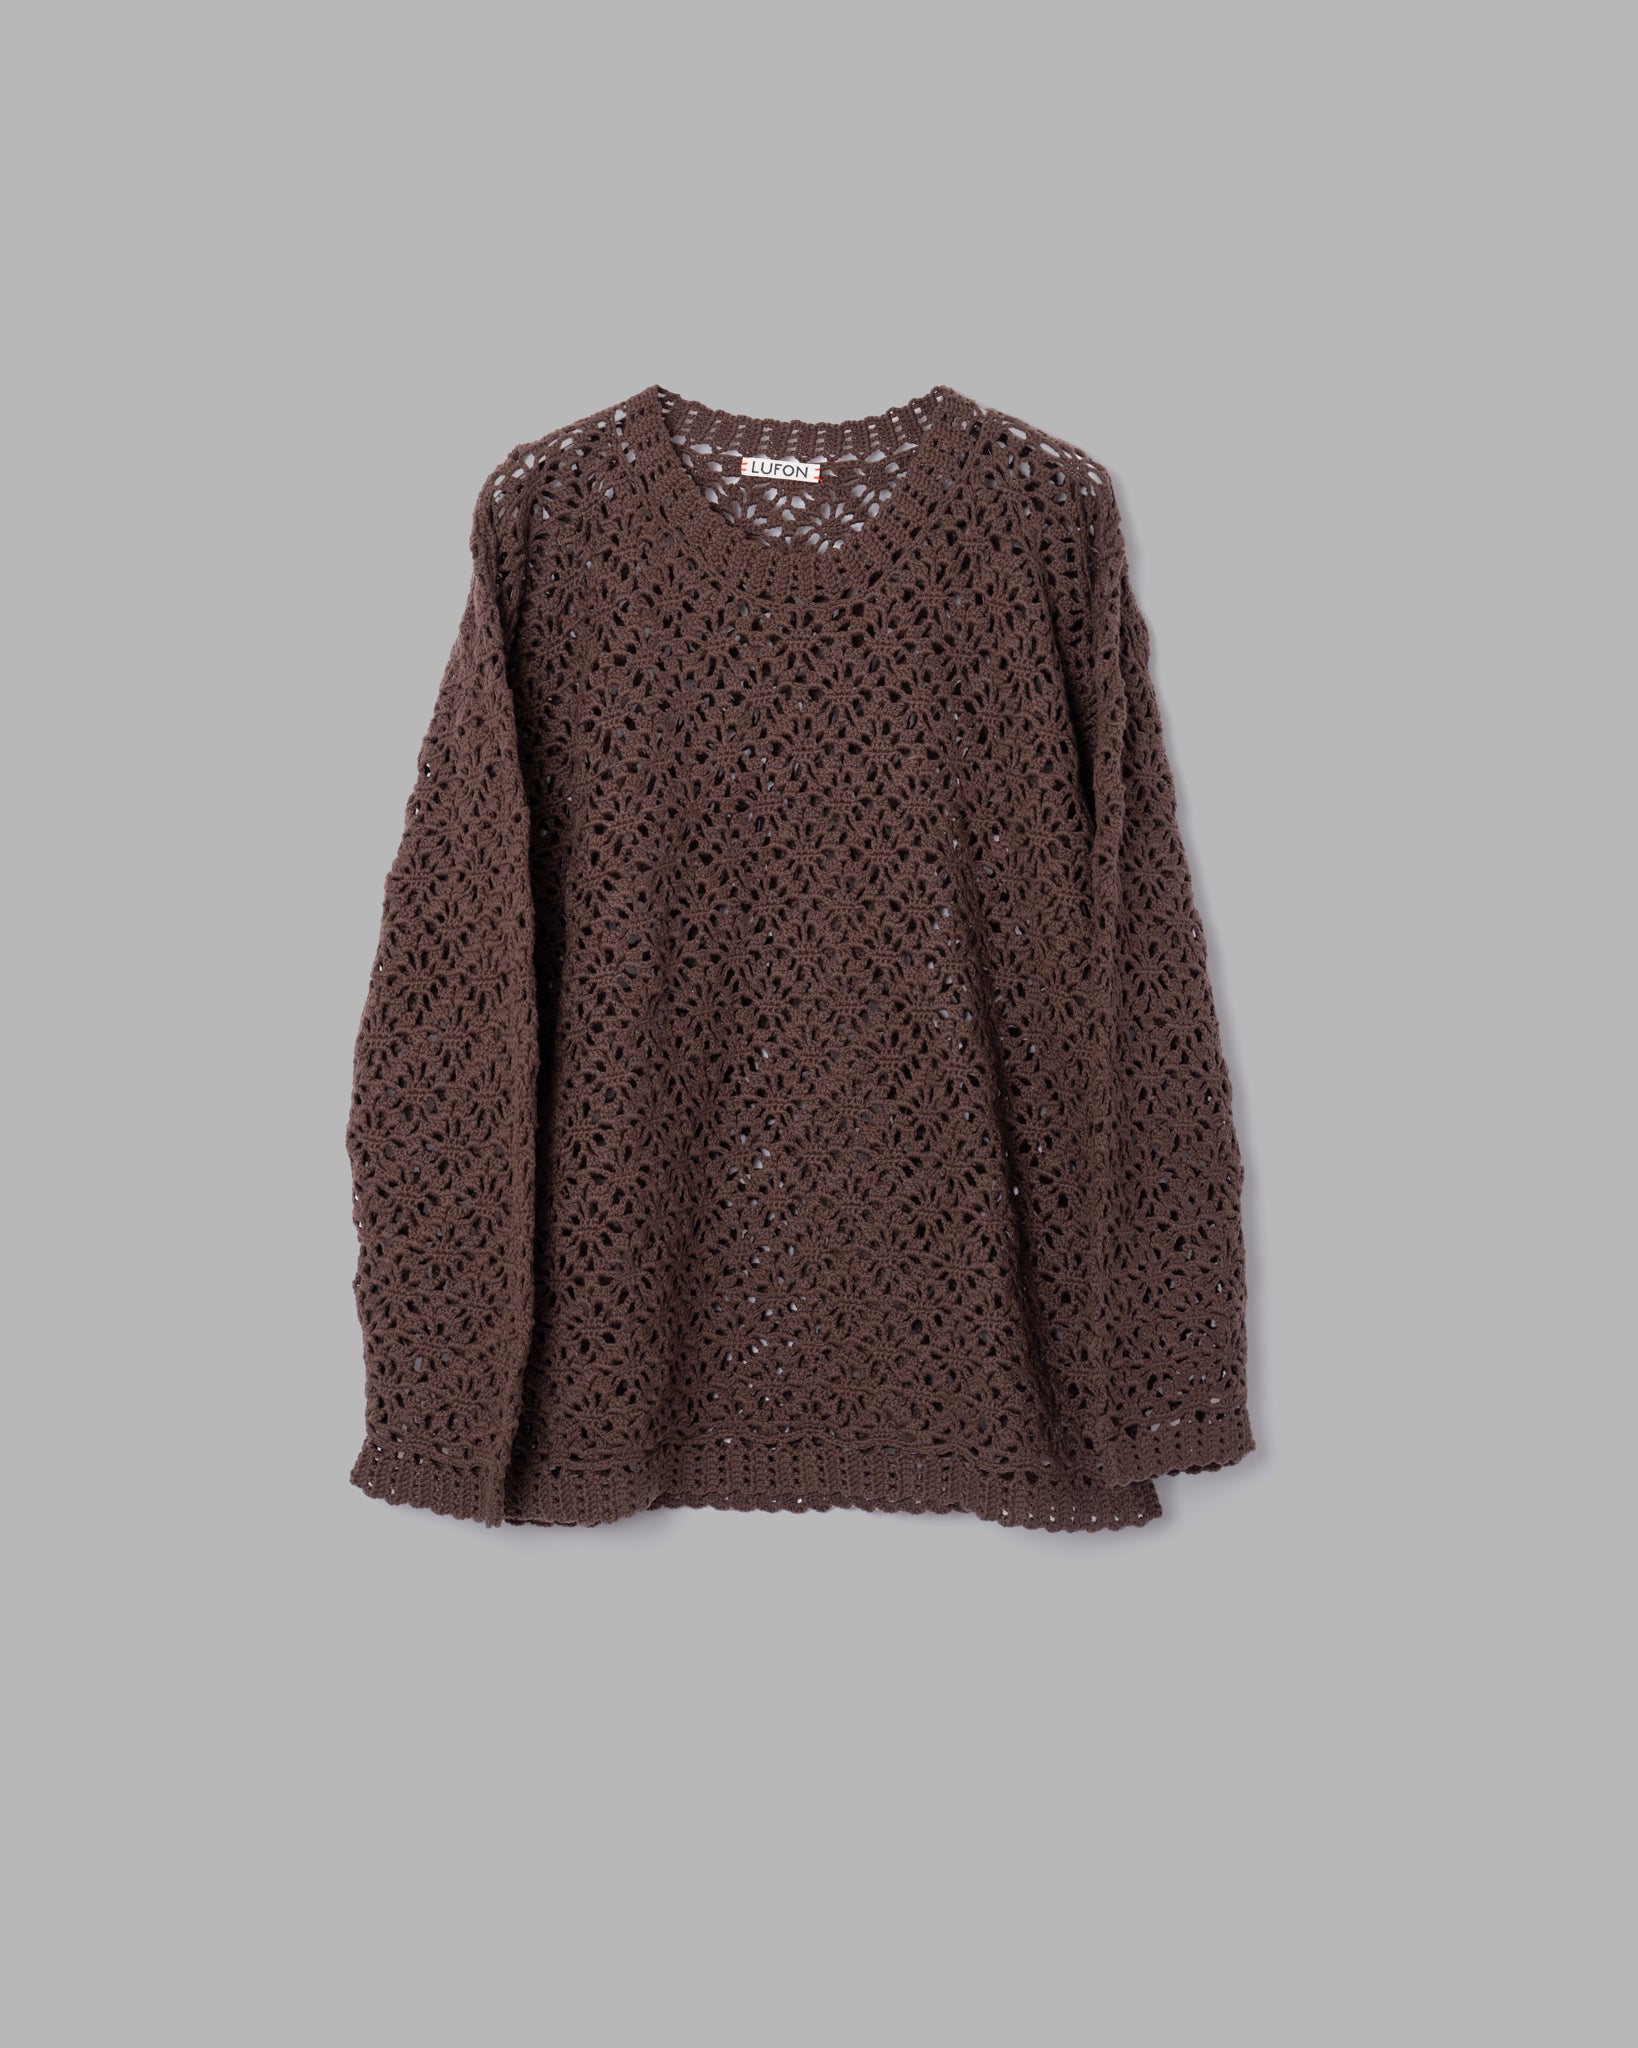 CROCHET HAND KNIT PULLOVER SWEATER - COFFEE